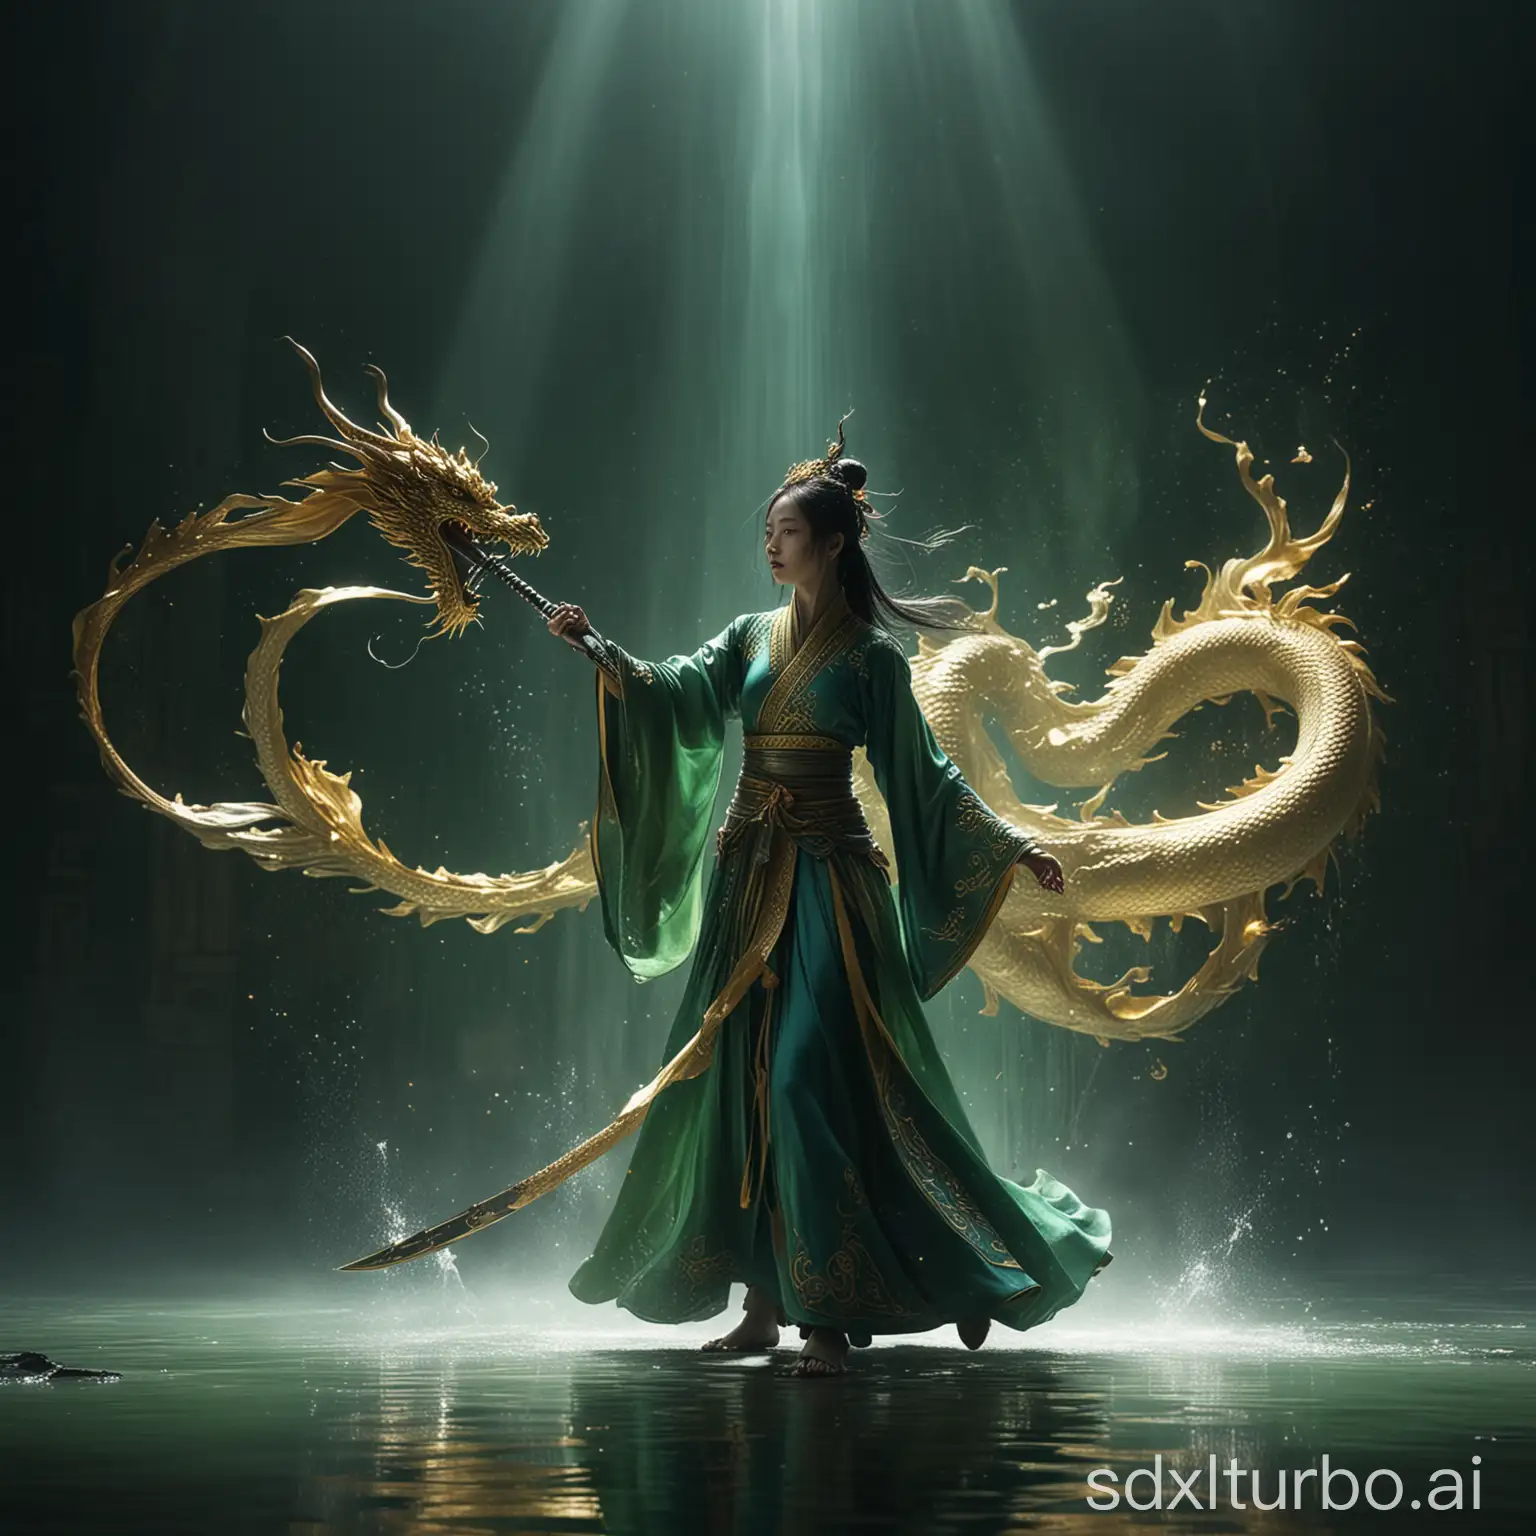 Oriental style beauty, sword in hand, sword dancing, green and gold clothing, a glowing golden dragon walking behind, realistic and ethereal style, Eastern Zhou Dynasty, the background of the picture is the strong air flow of the picture impact, 8k, fantasy, allegorical, animation style, epic ink mixing lens, shining blue magic light. Abstract image, intense light, Rembrandt lighting, style in fluid color combination, surreal water, shine/gloss --ar 16:9